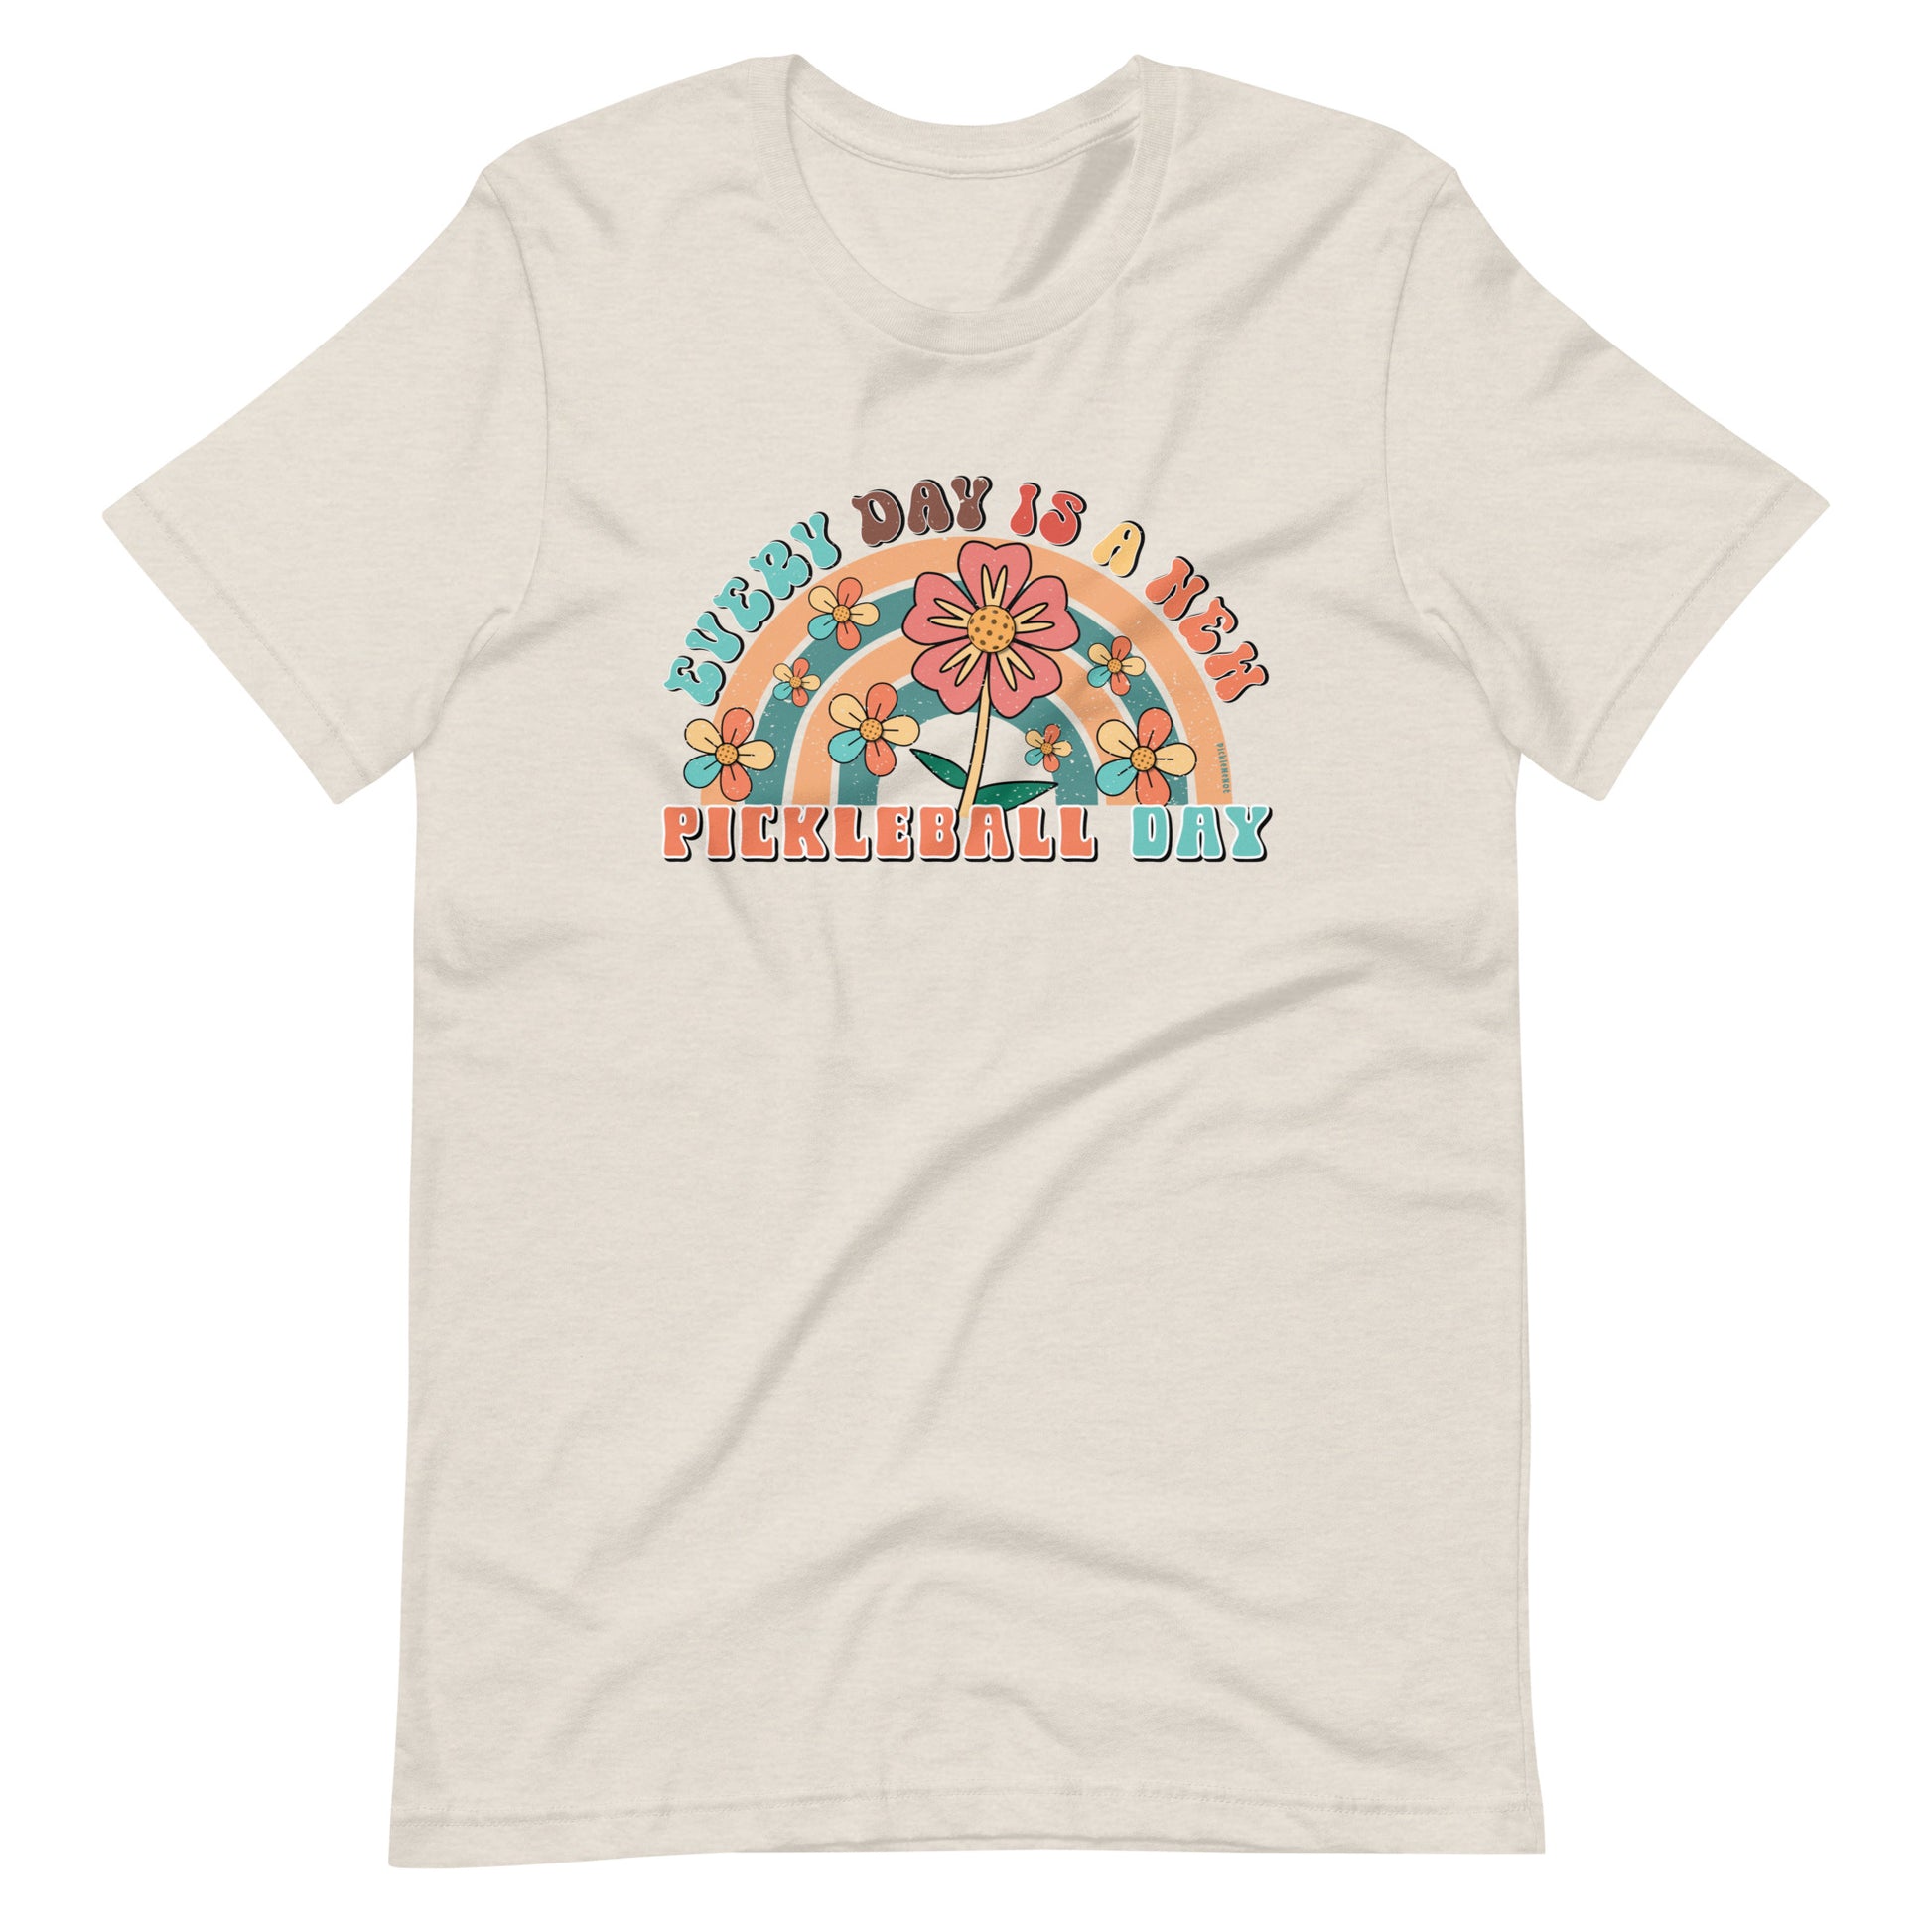 Fun Pickleball Rainbow Graphic: "Every Day Is A New Pickleball Day," Womens Unisex Heather Dust T-Shirt